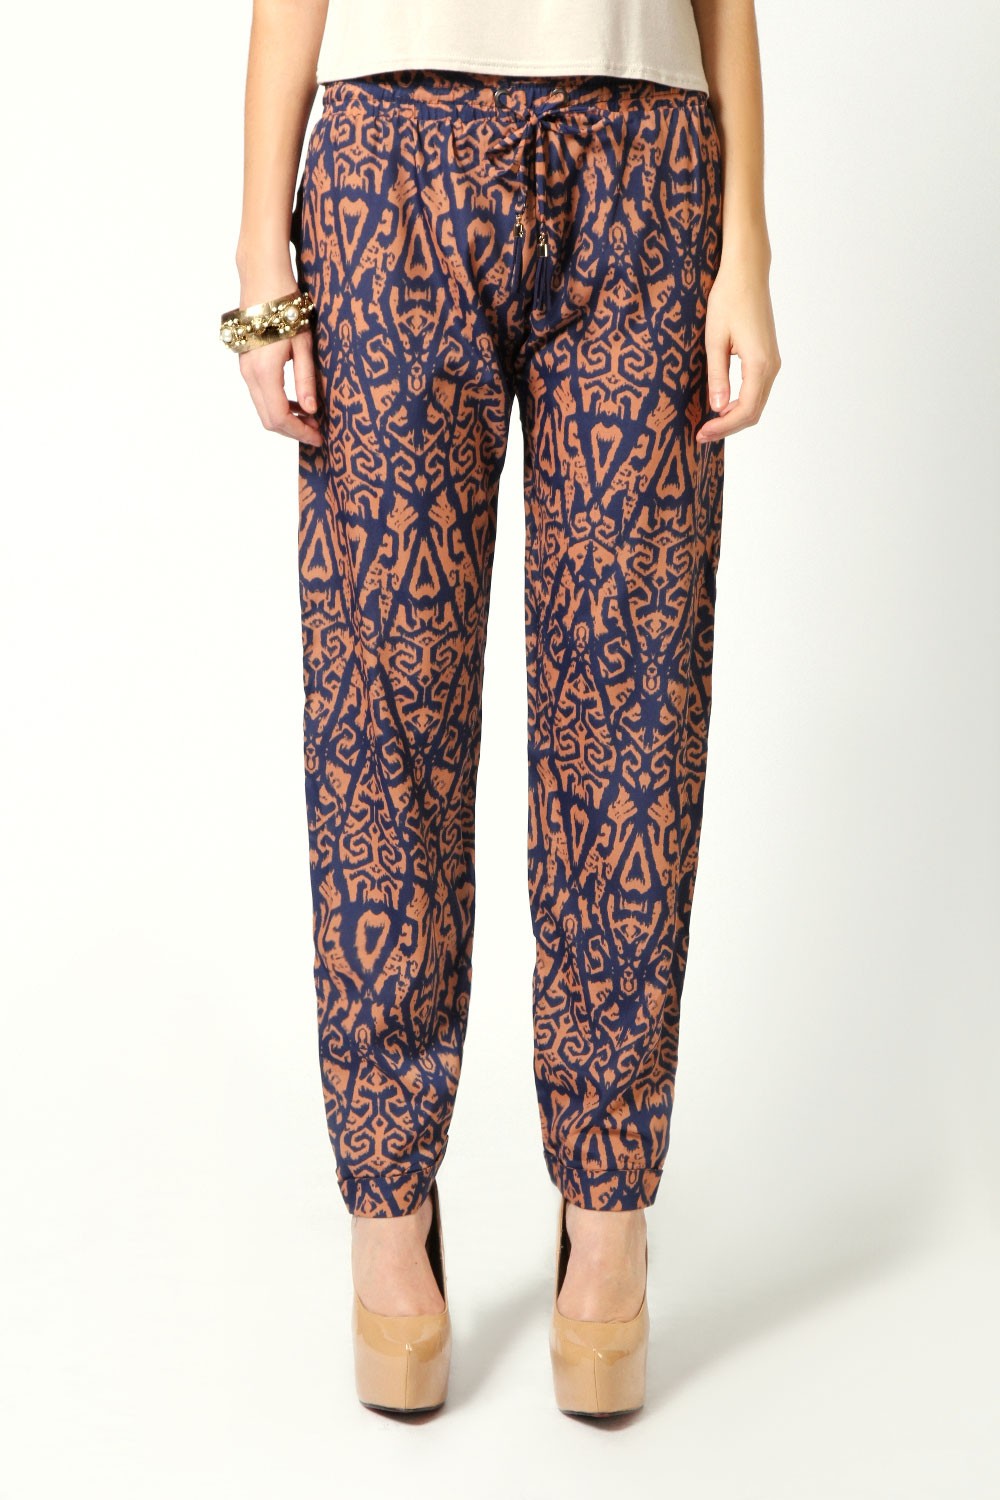 boohoo.com Emily Relaxed Fit Ikat Print Drawcord Trousers $50 nz fashion blogger